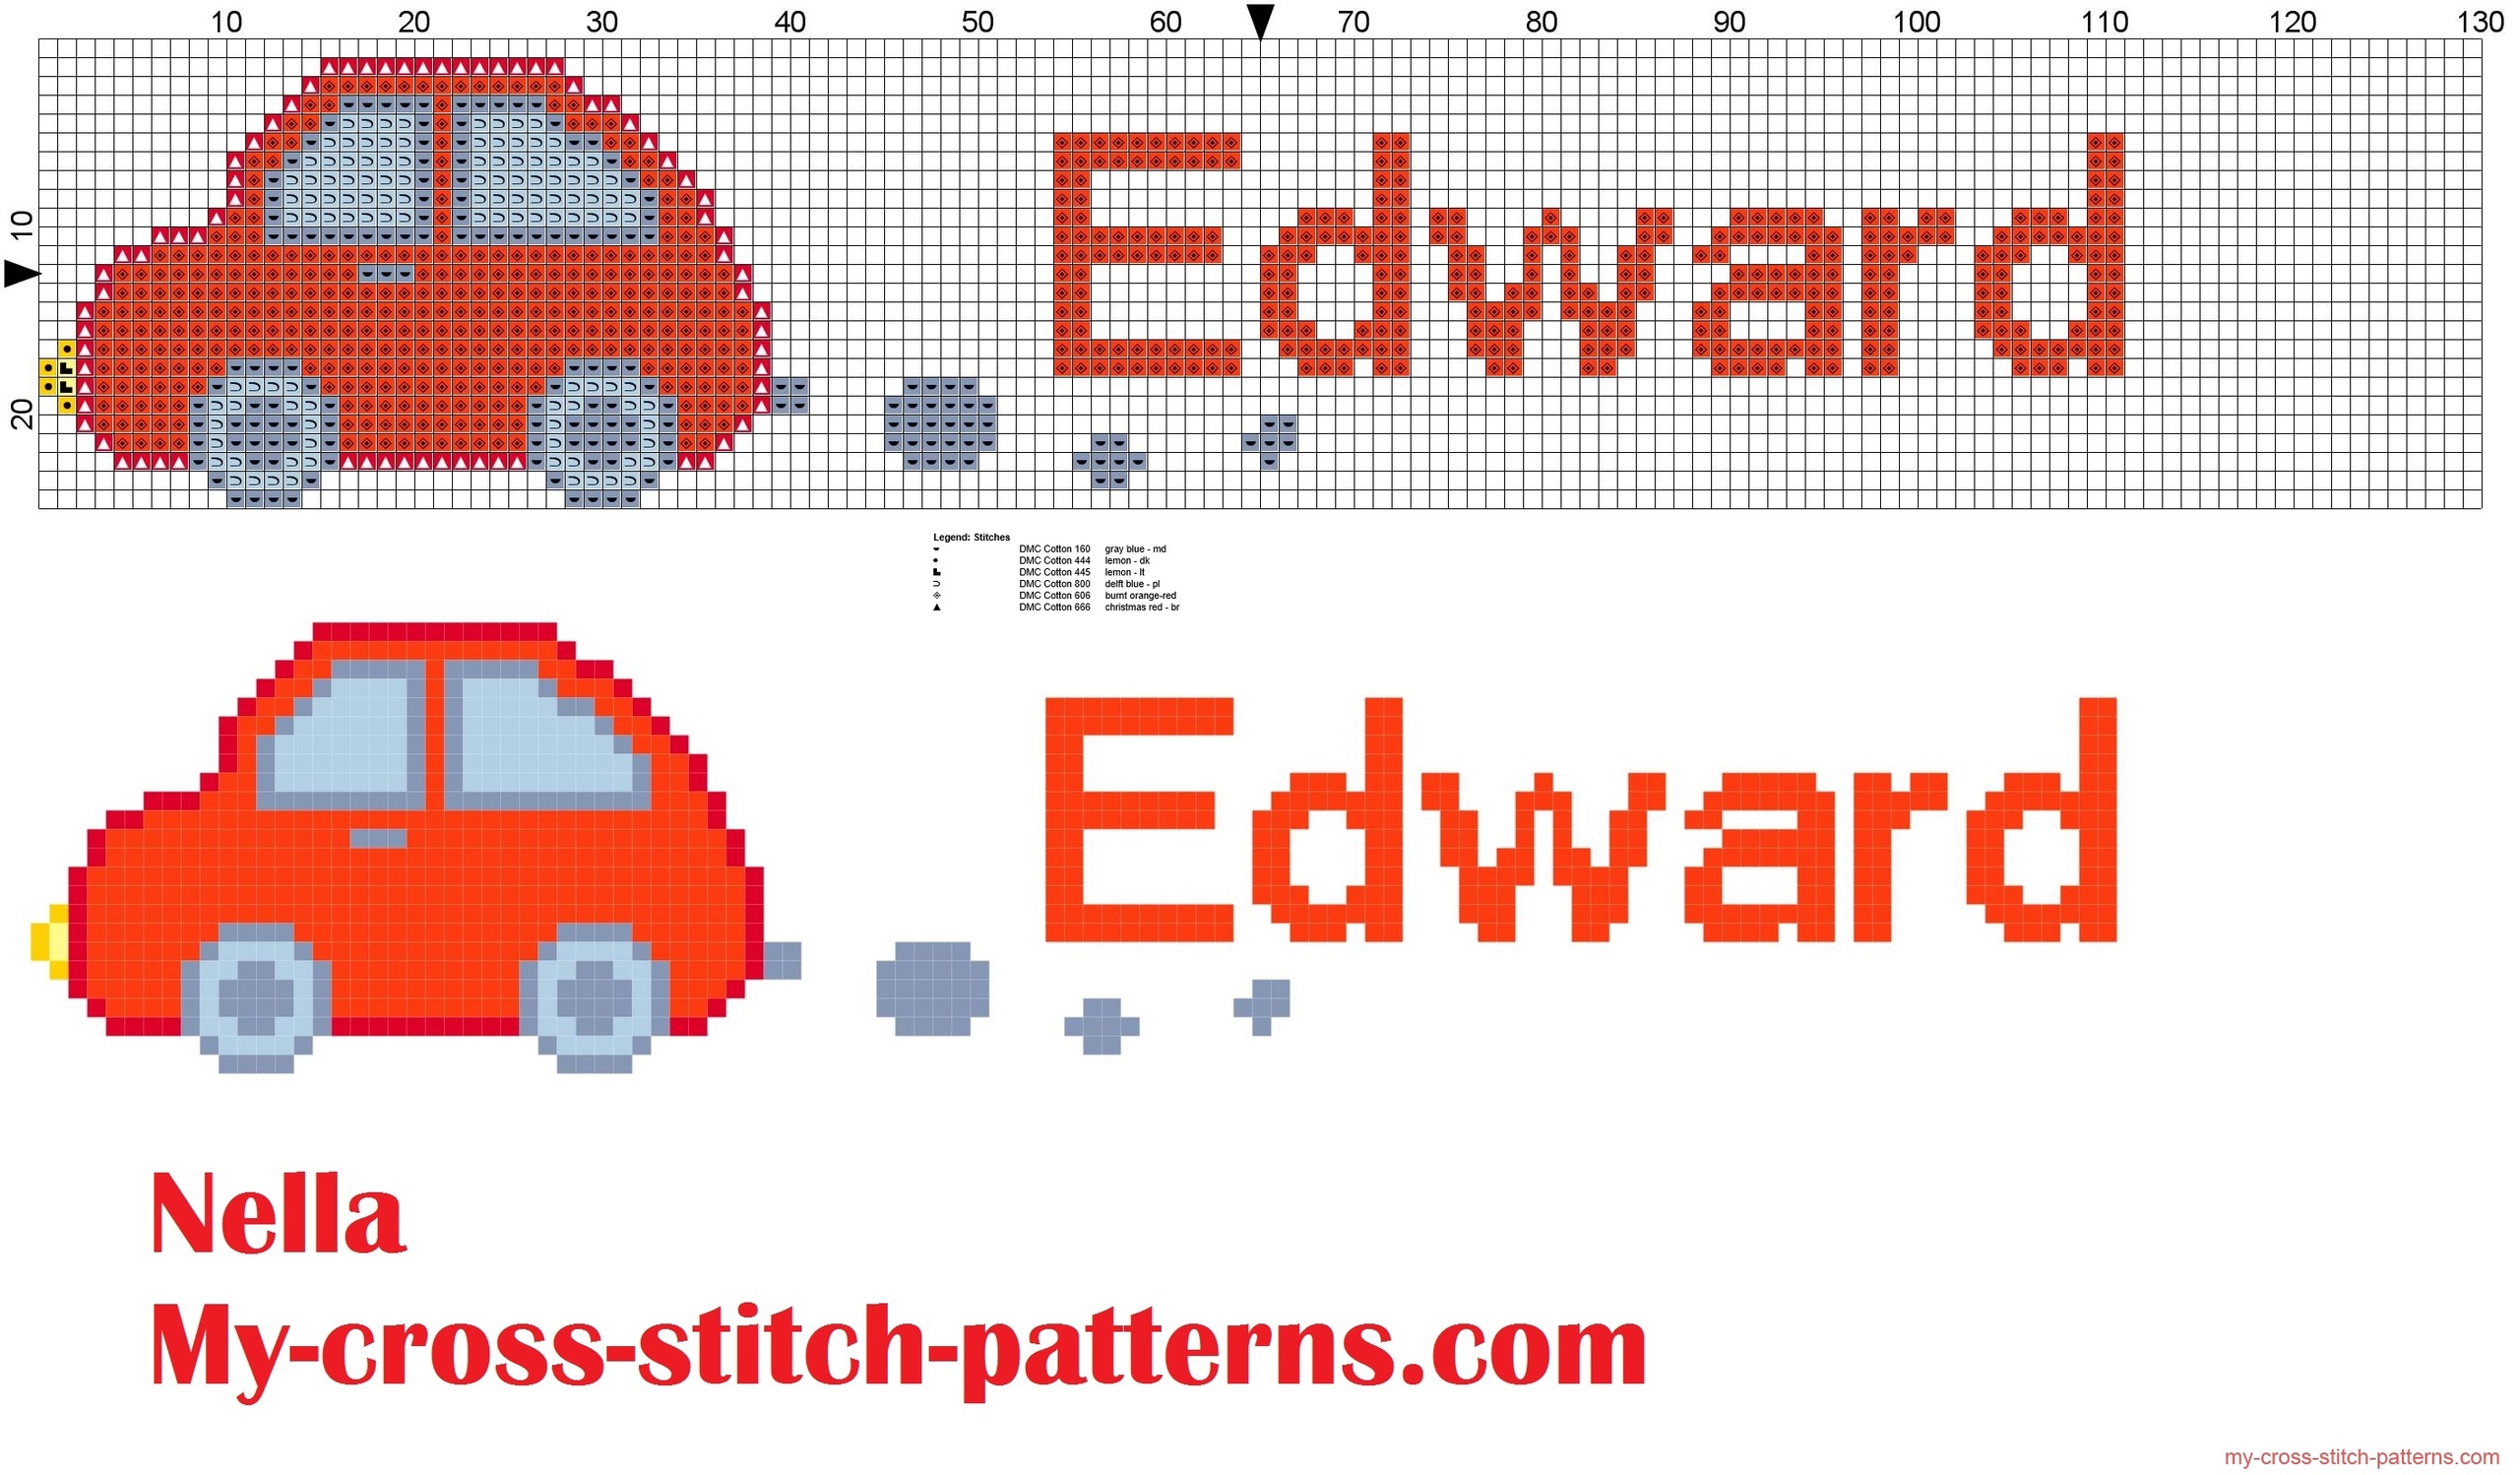 edward_name_with_toy_car_cross_stitch_patterns